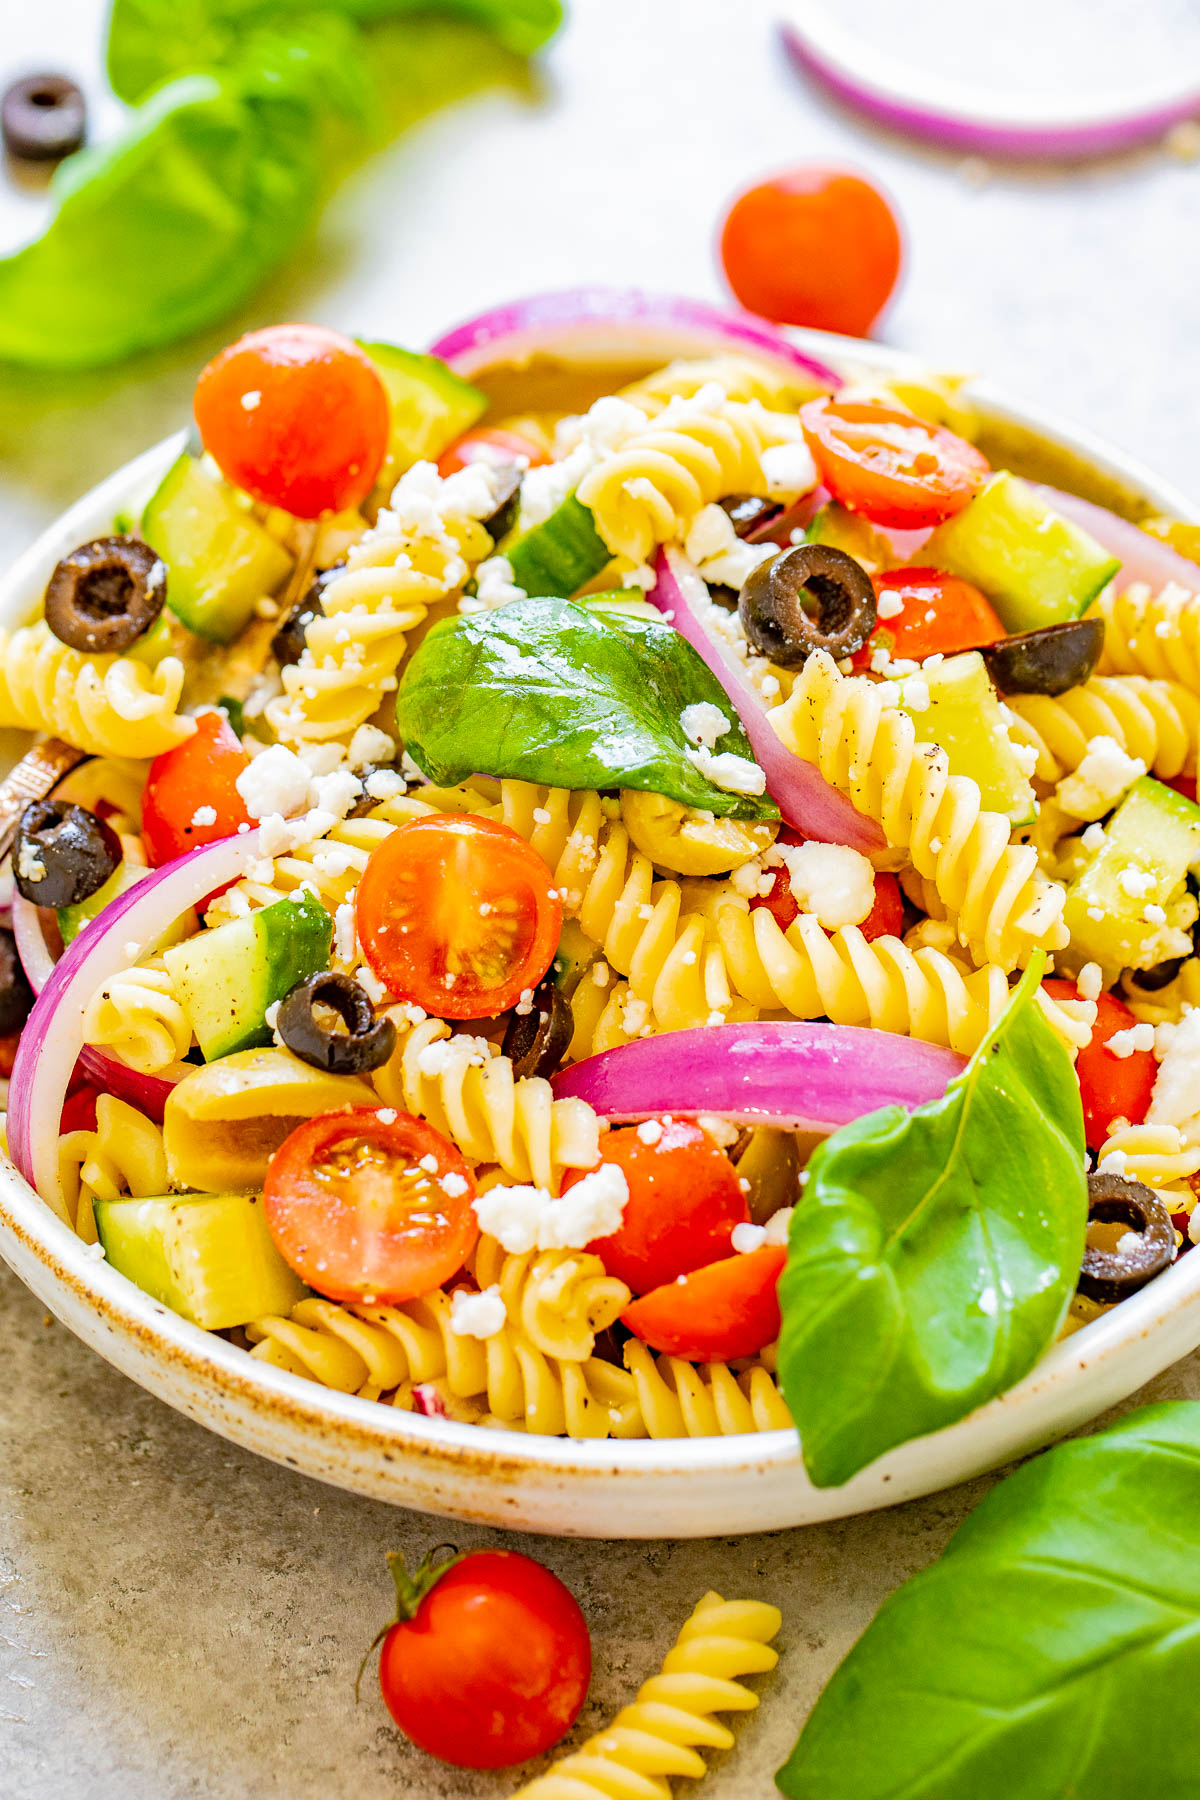 Mediterranean Pasta Salad - Juicy tomatoes and cucumbers, black and green olives, crumbled feta, and tender pasta are tossed in a homemade balsamic vinaigrette! An EASY pasta salad recipe with Mediterranean-inspired ingredients that's ready in under 30 minutes! It makes a big batch and is perfect for potlucks, picnics, or planned leftovers. 